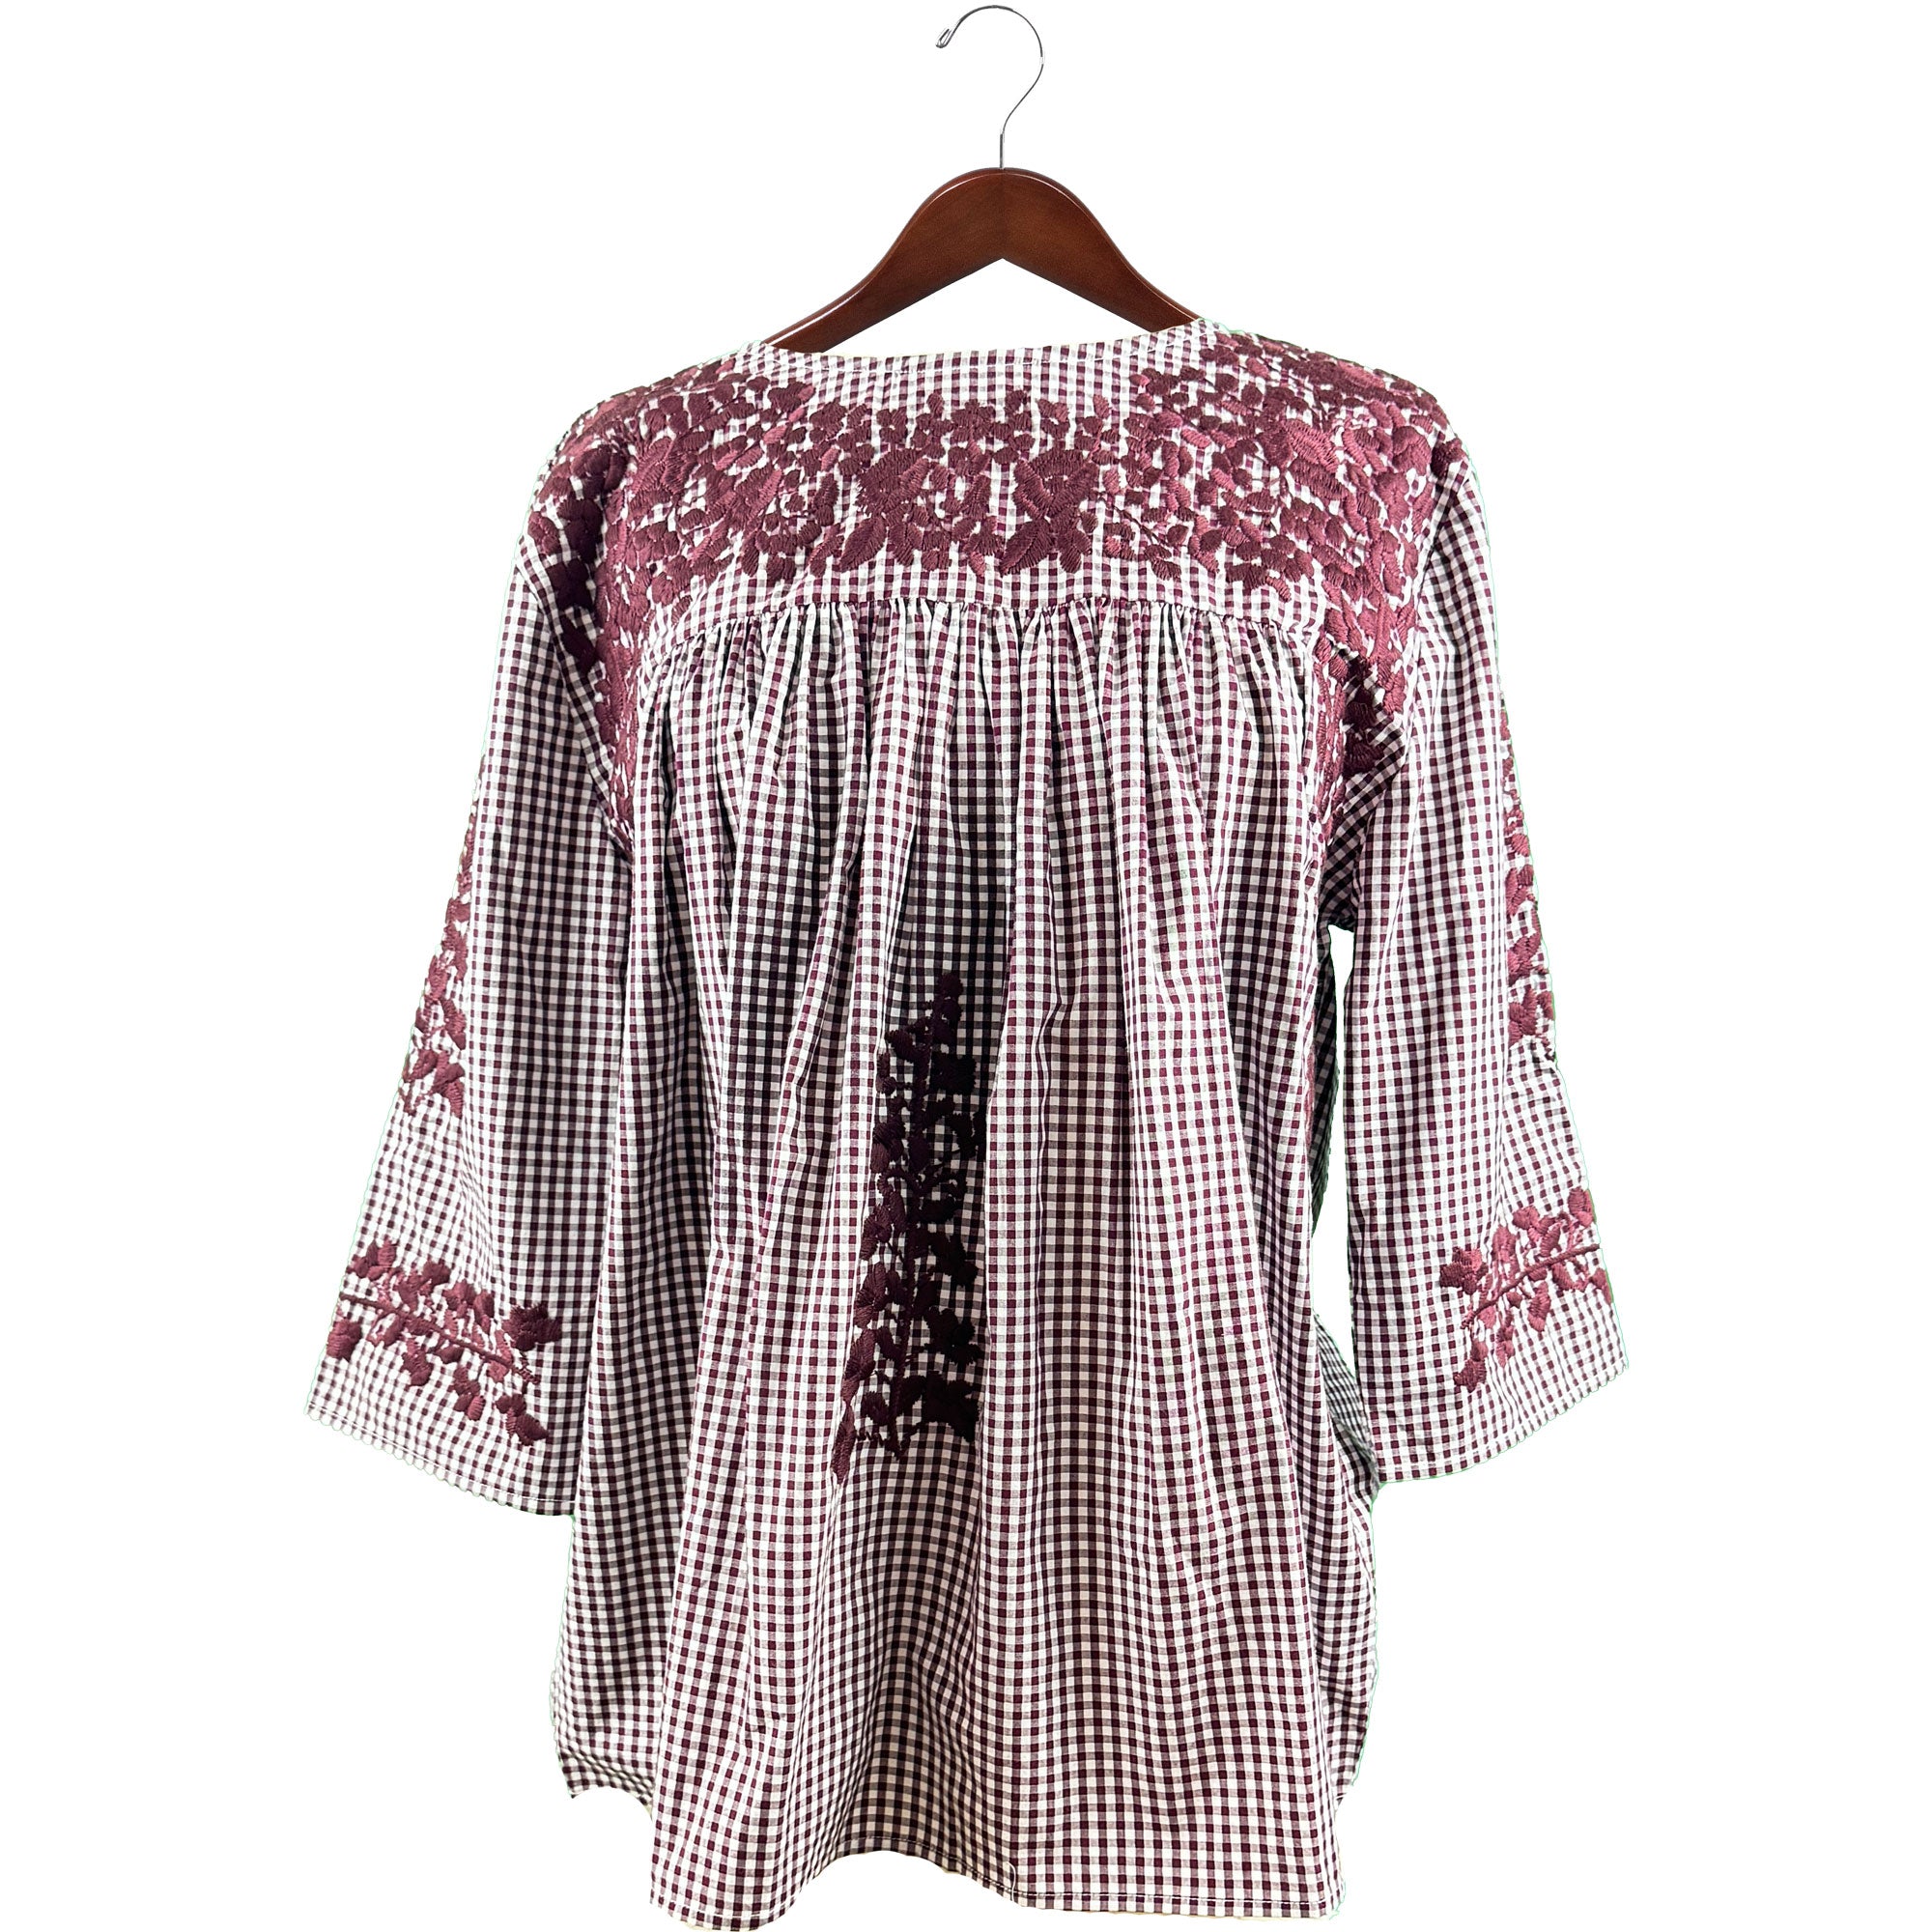 Aggie Maroon Gingham Saturday Blouse